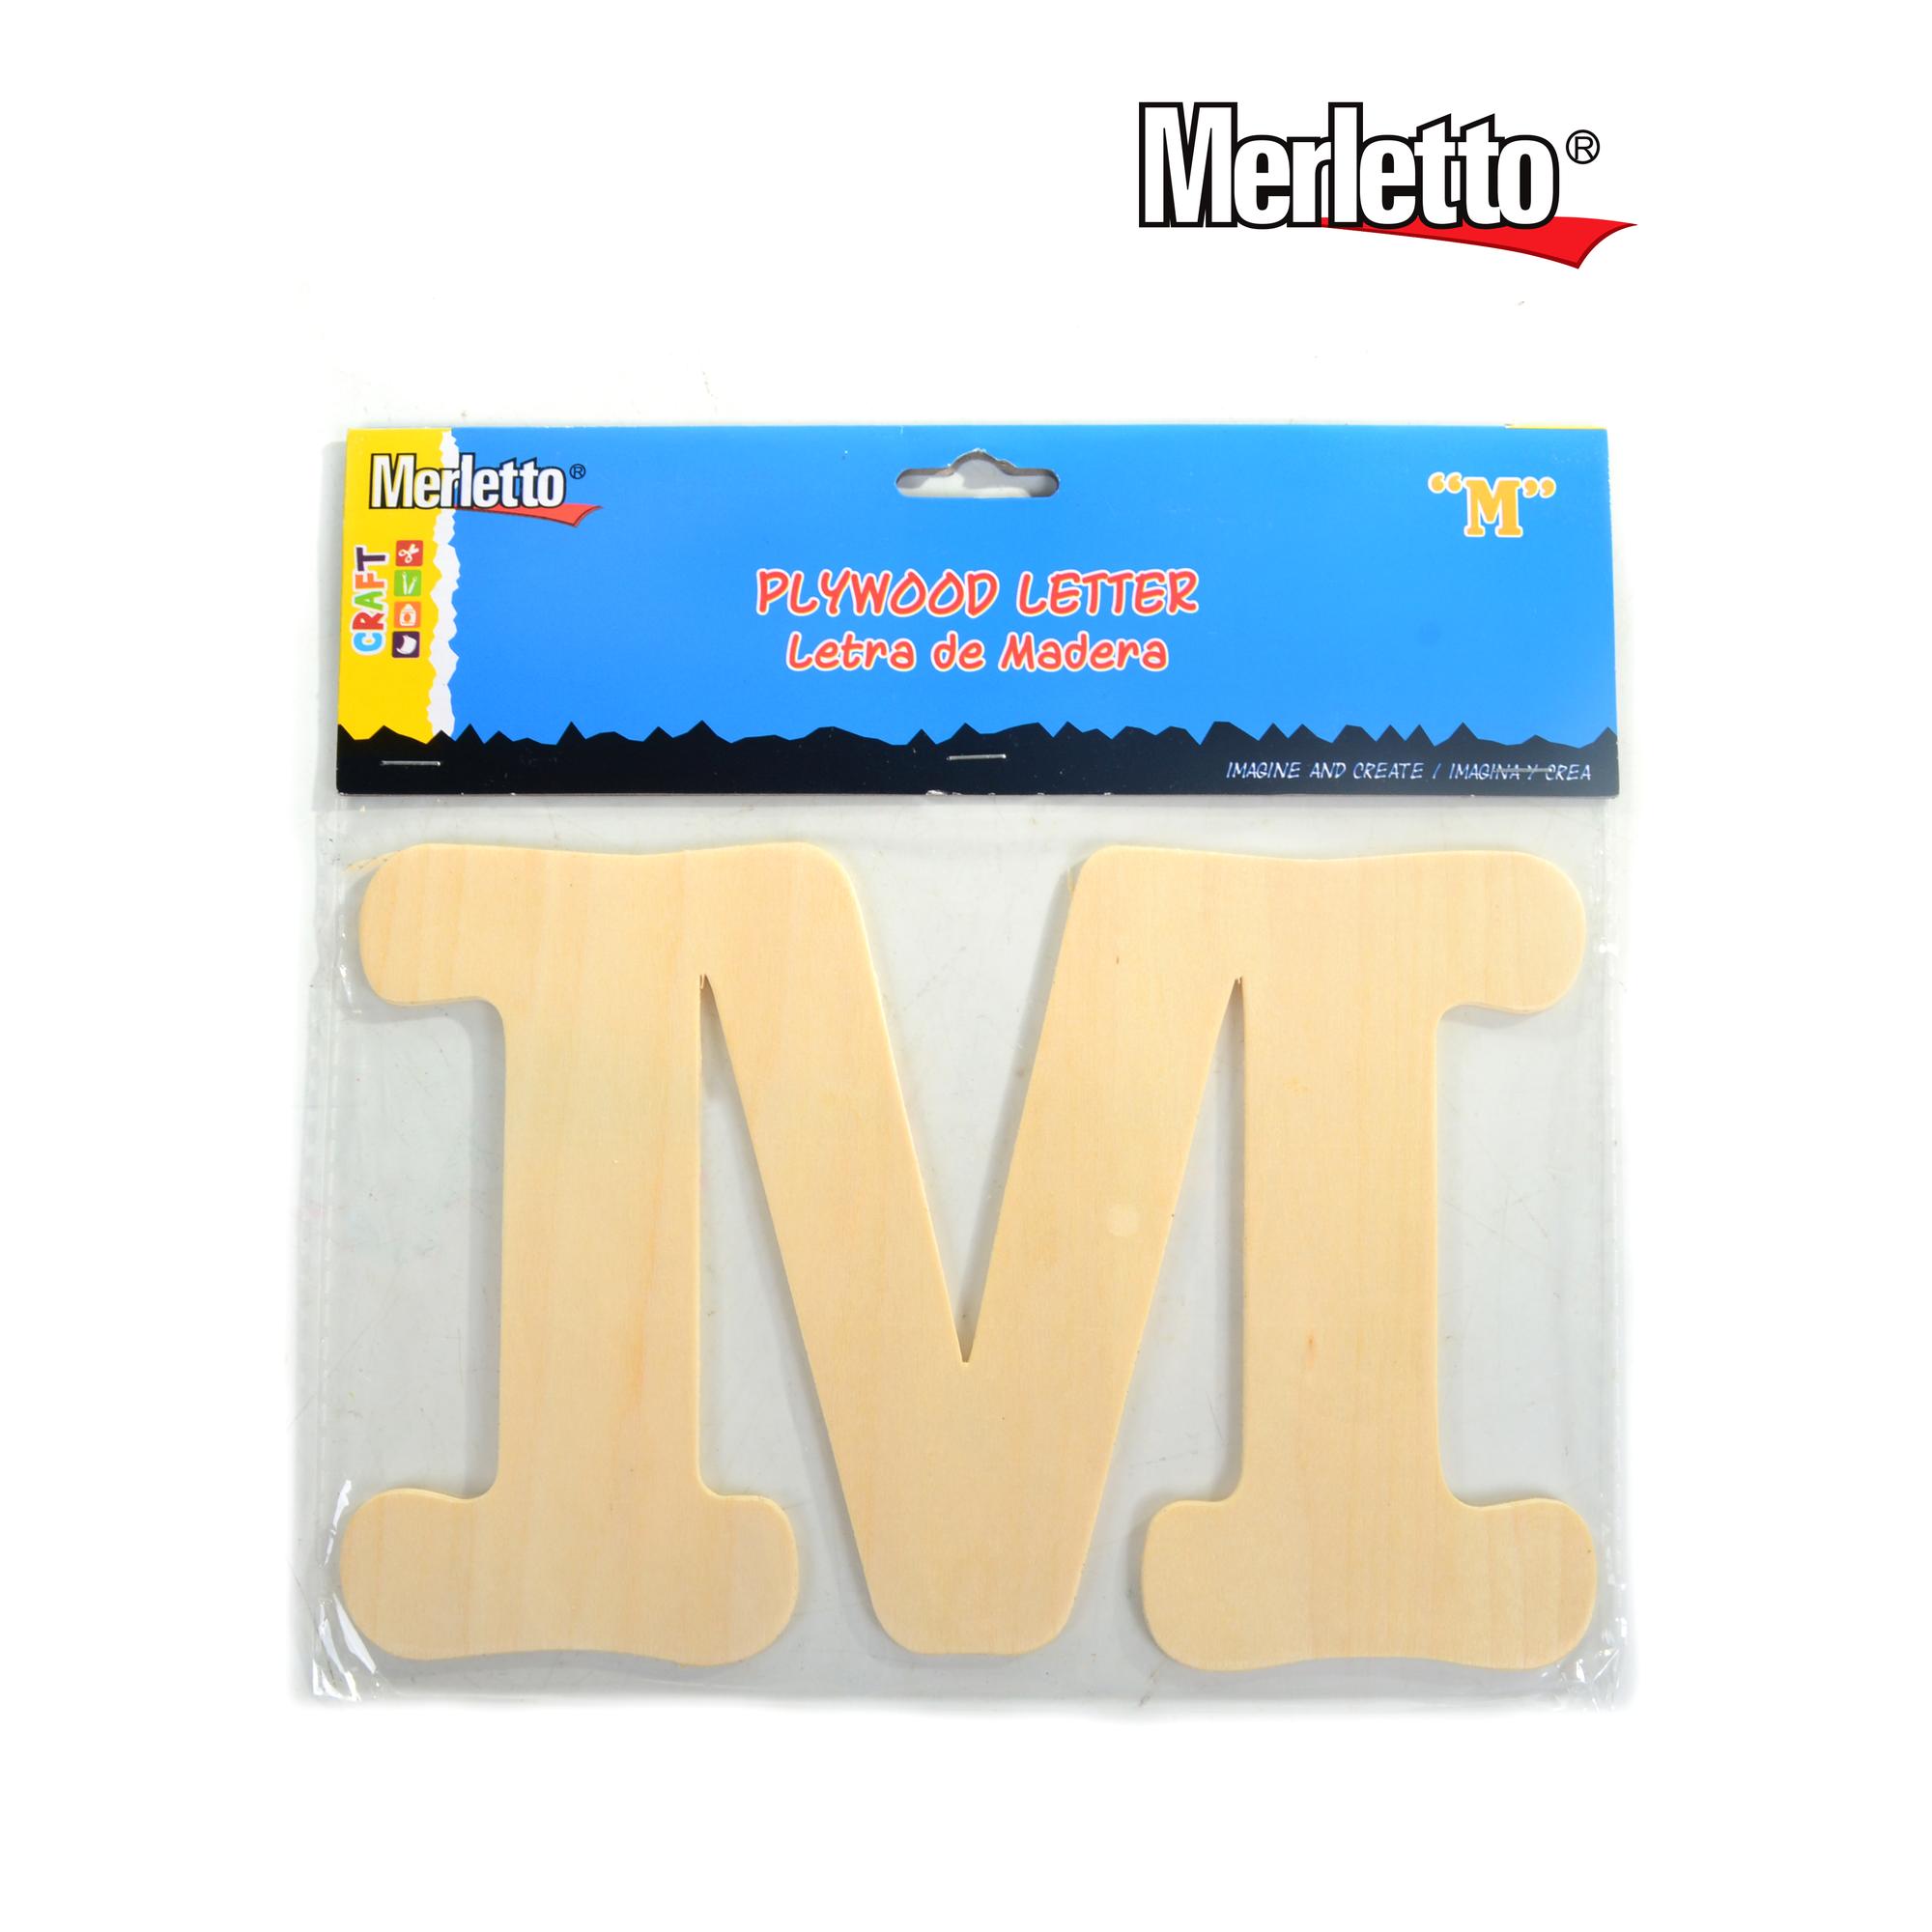 288BOL/CTN WOODEN LETTER INCHESM INCHES - 785-7172067